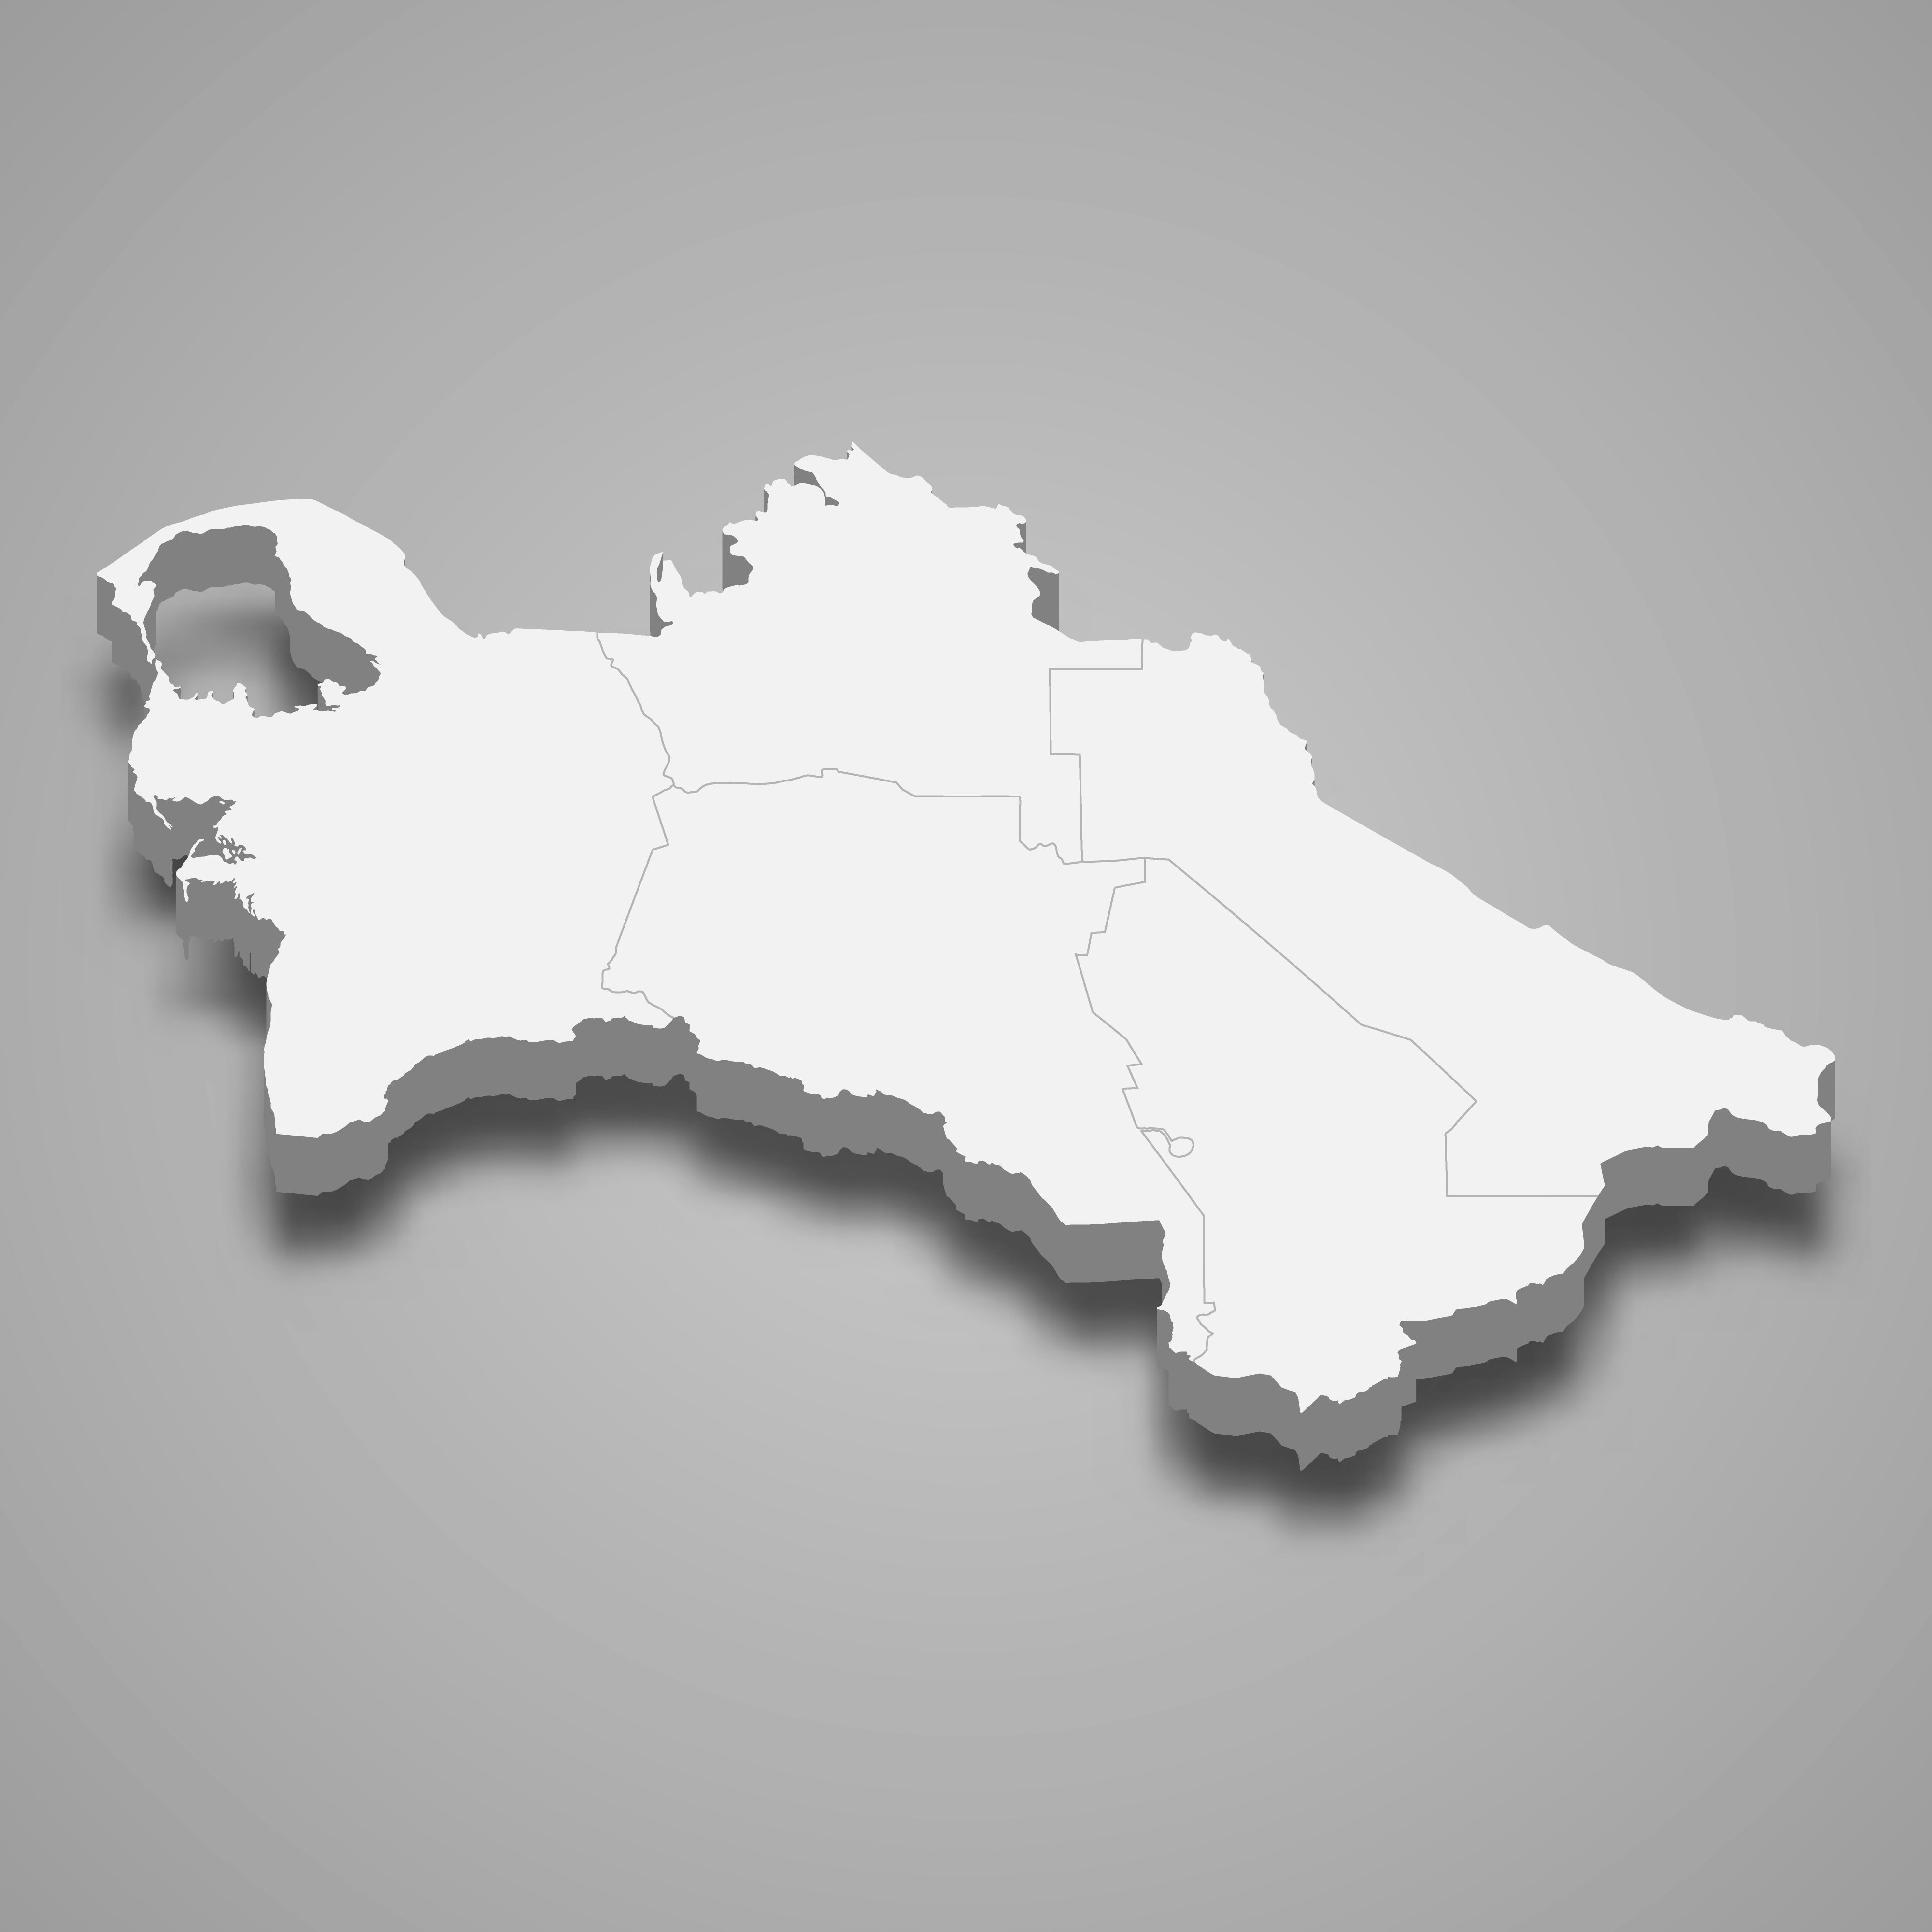 3d map of Turkmenistan with borders of regions. 3d map with borders Template for your design